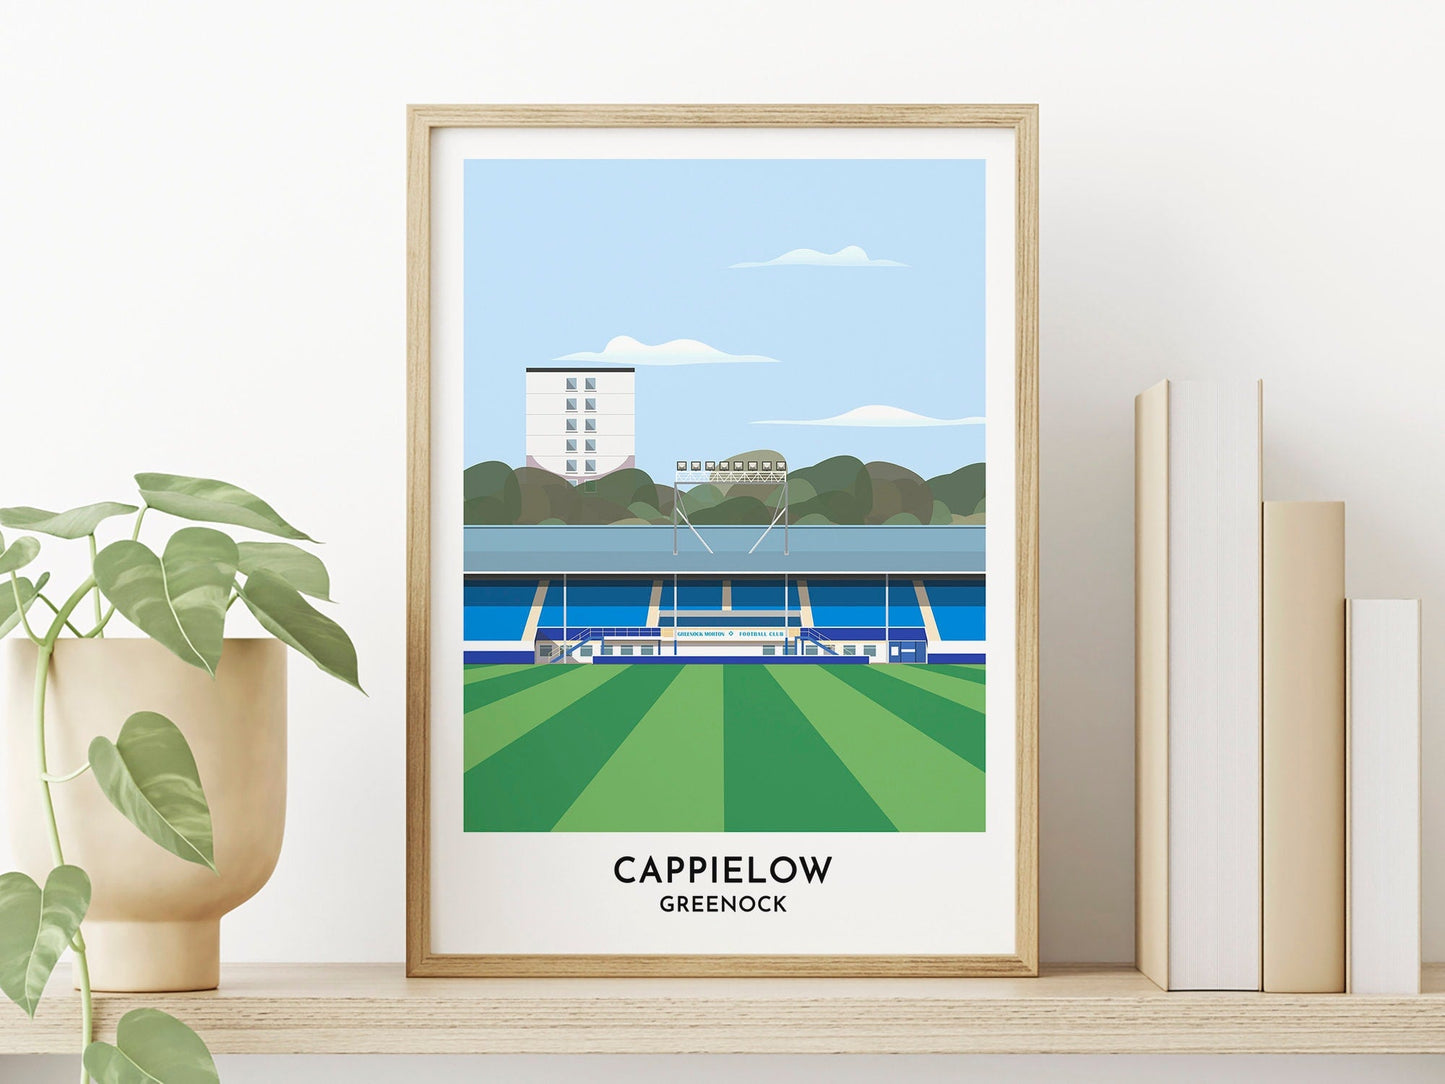 Greenock Morton Stadium Illustration of Cappielow Park, Football Print Poster, Perfect Gift for Him or Her - Turf Football Art